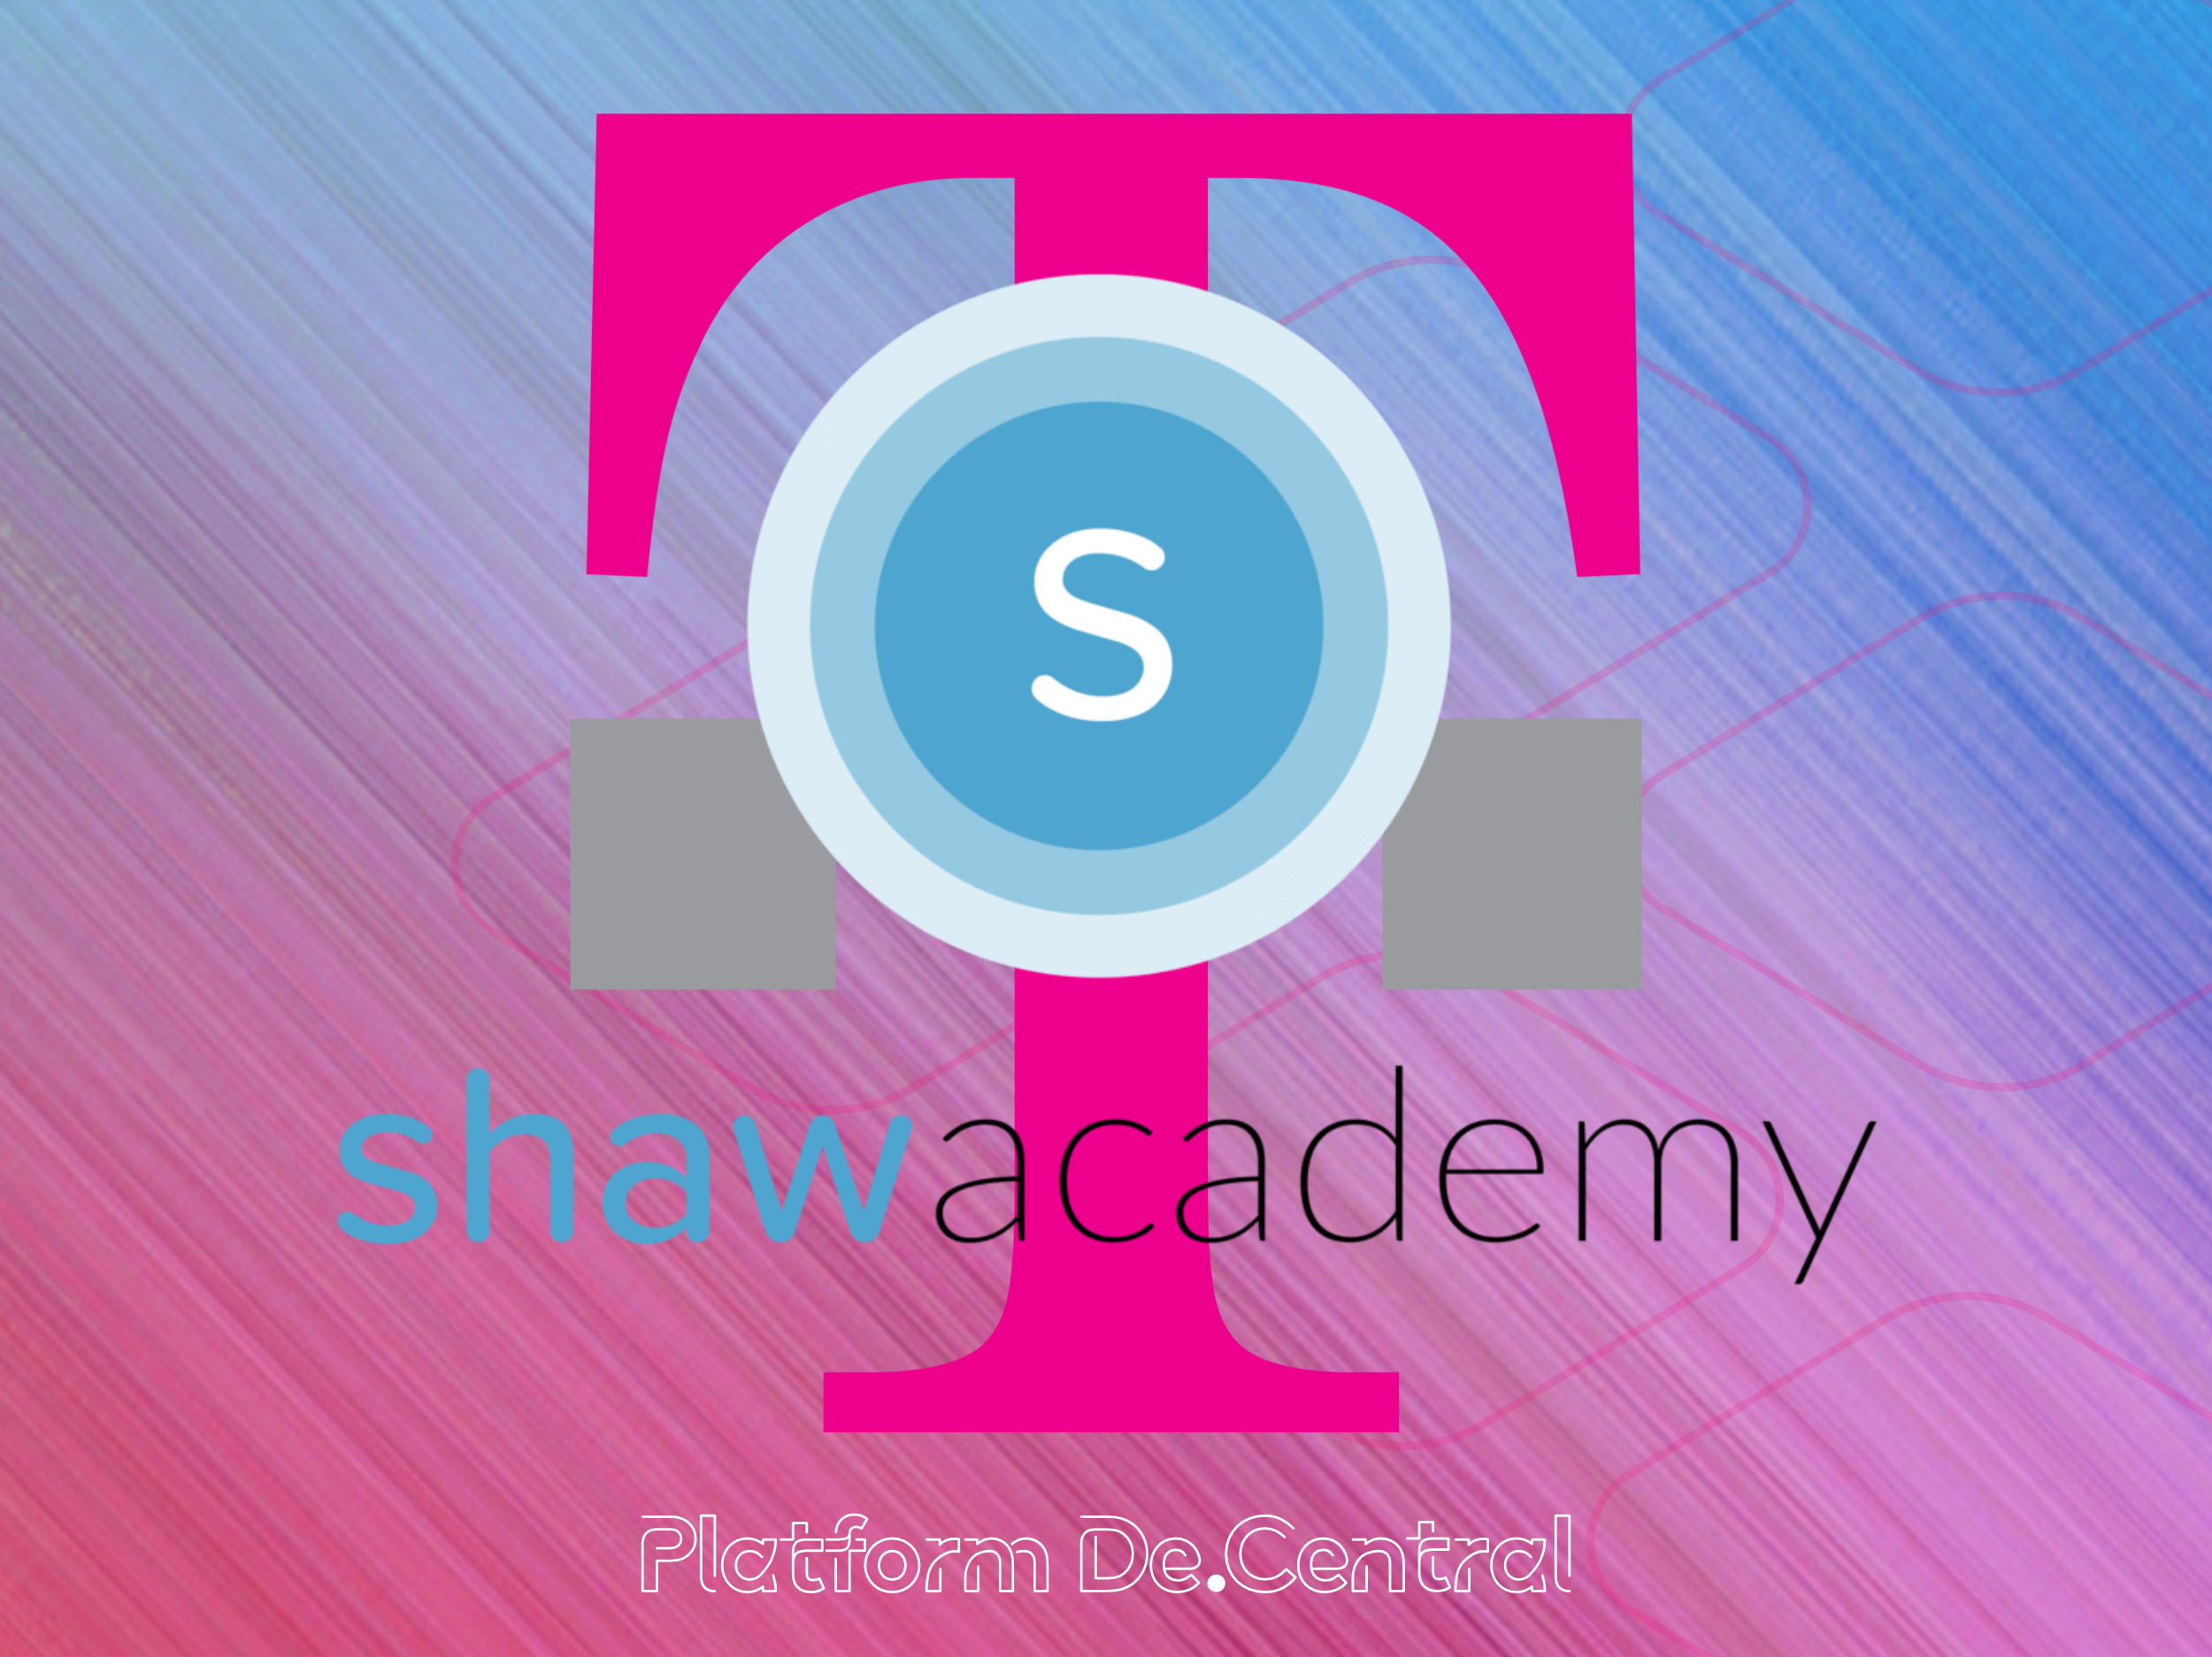 T-Mobile says thank you by offering a 4 week course on Shaw Academy